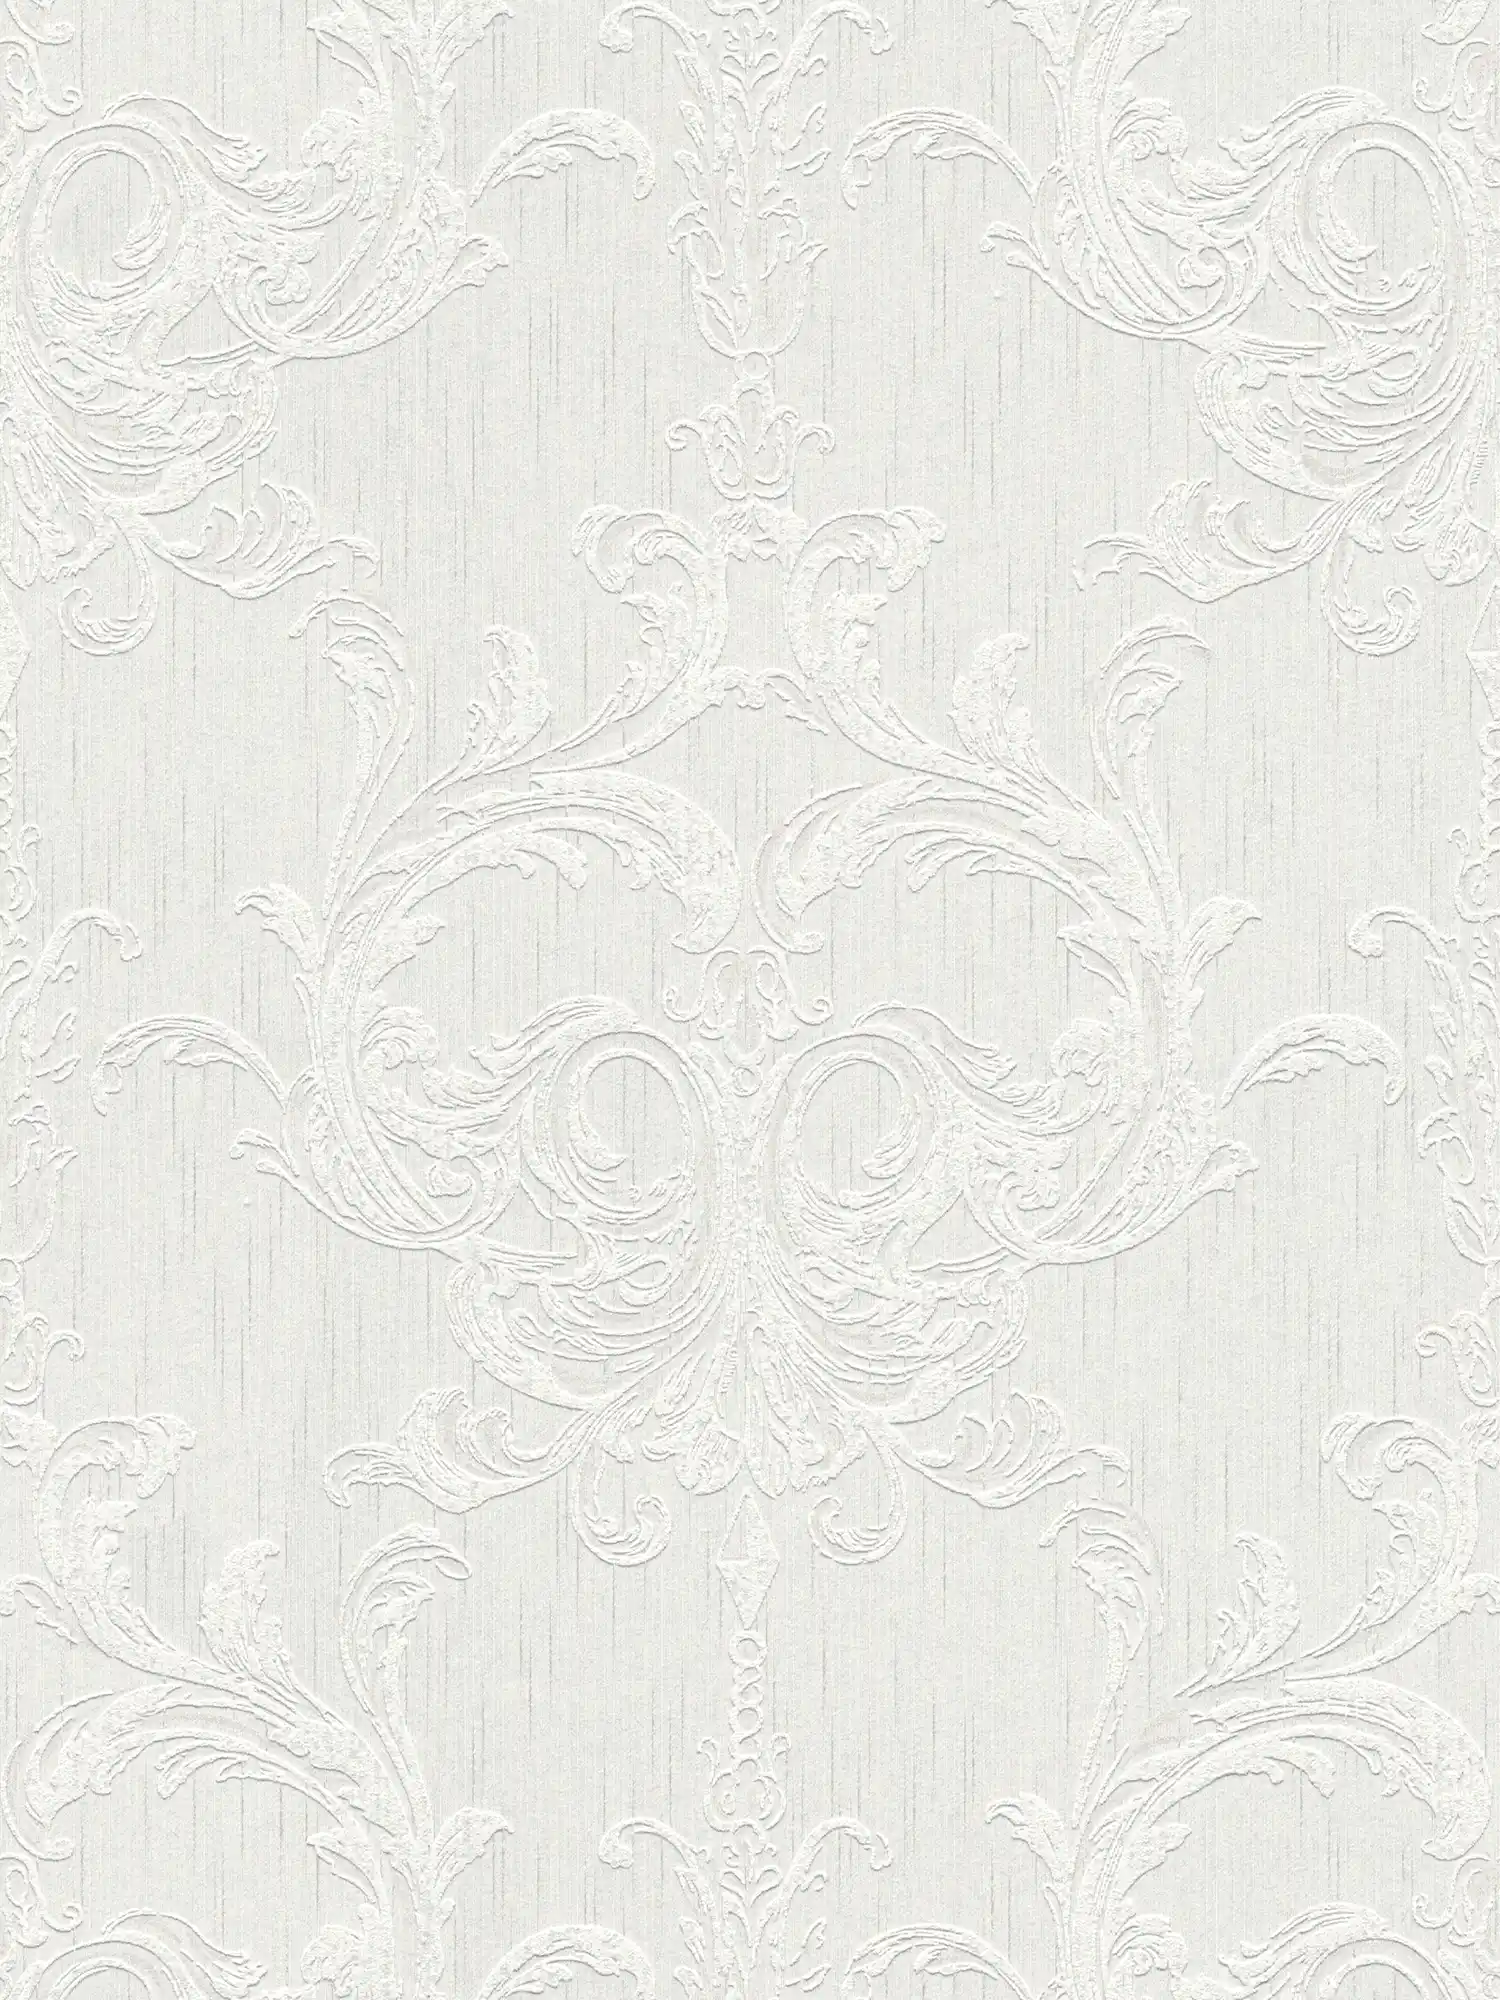 Ornamental wallpaper with stucco design & plaster look - grey, white
